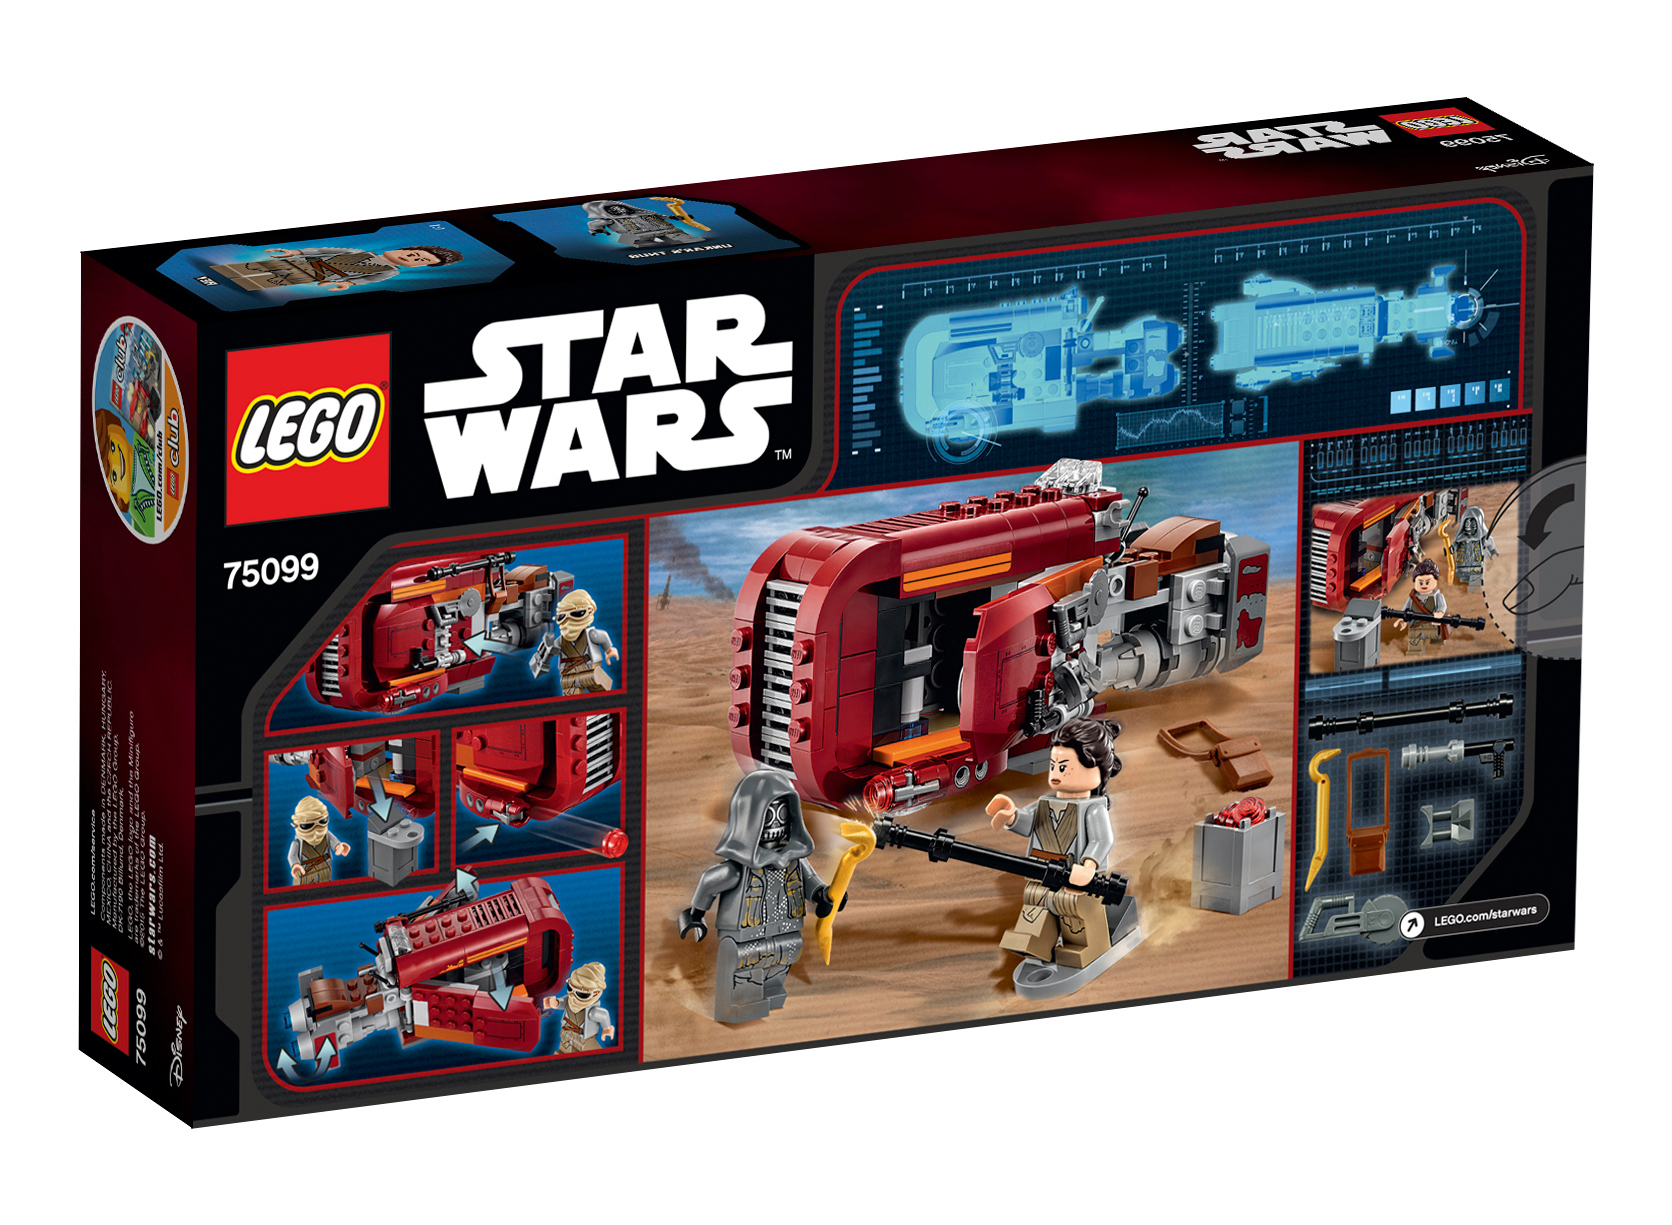 the lego star wars box includes two pieces